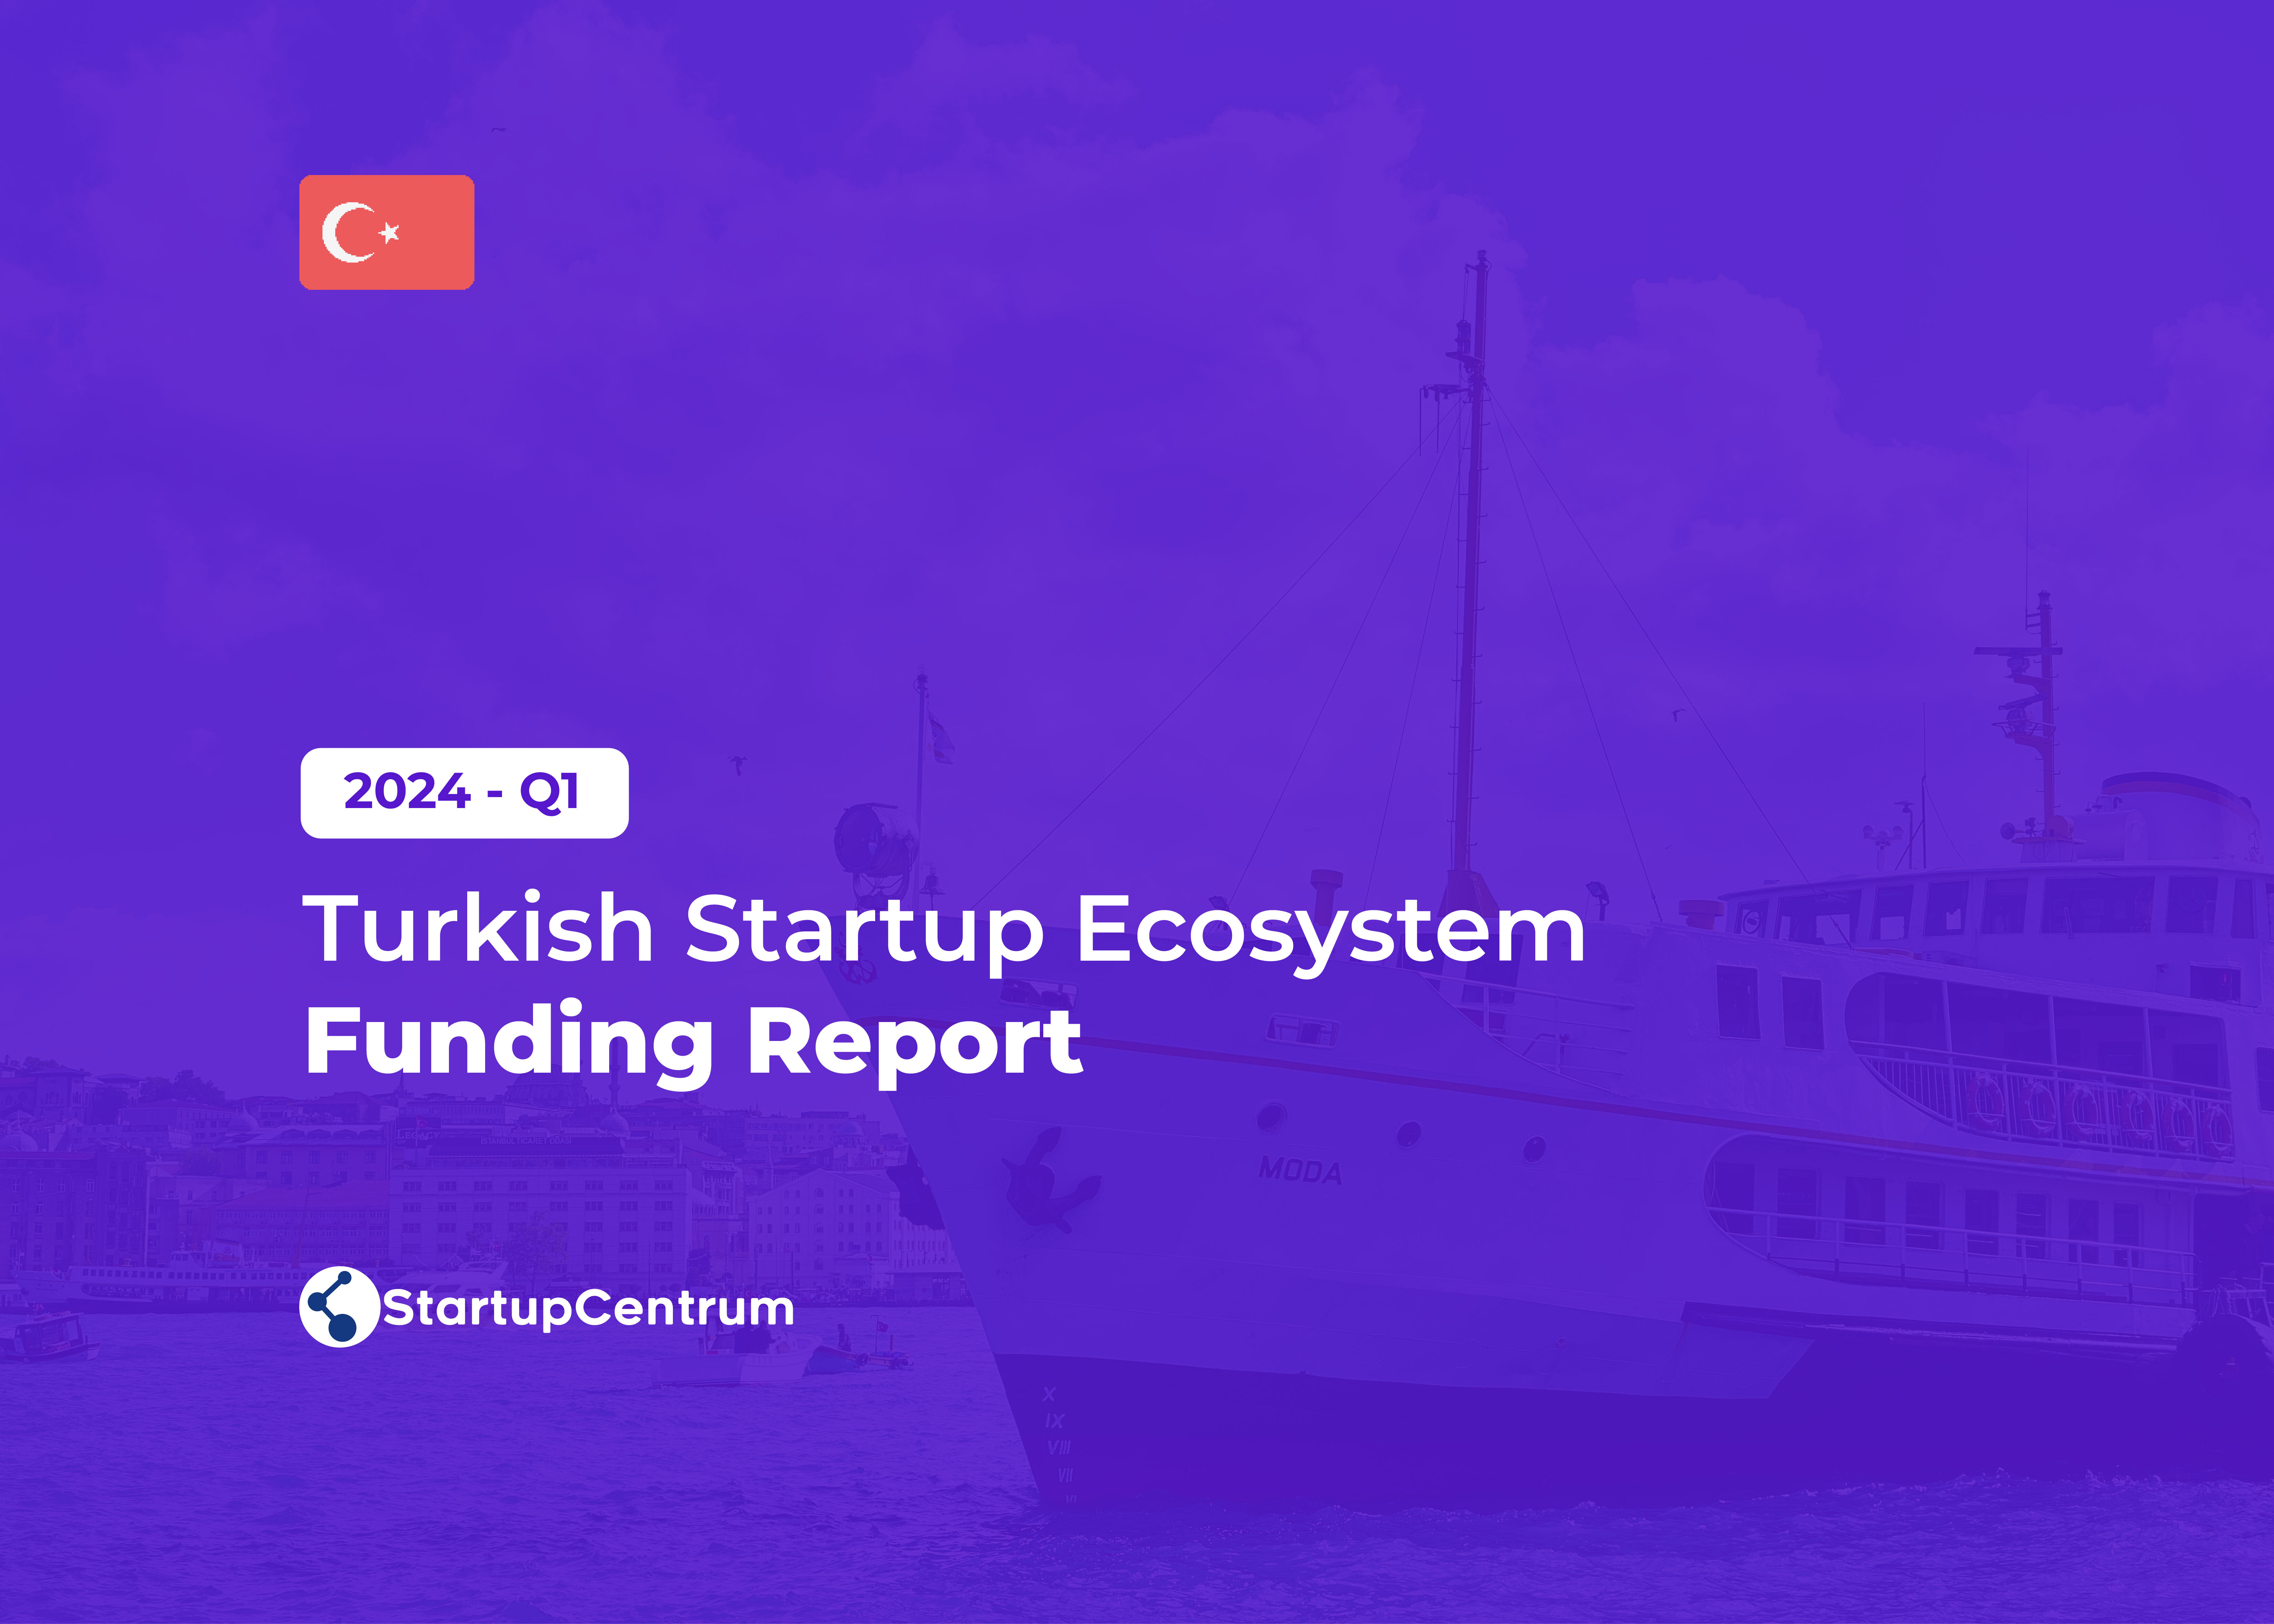 2024 - Q1 Turkish Startup Ecosystem Funding Report Cover Image